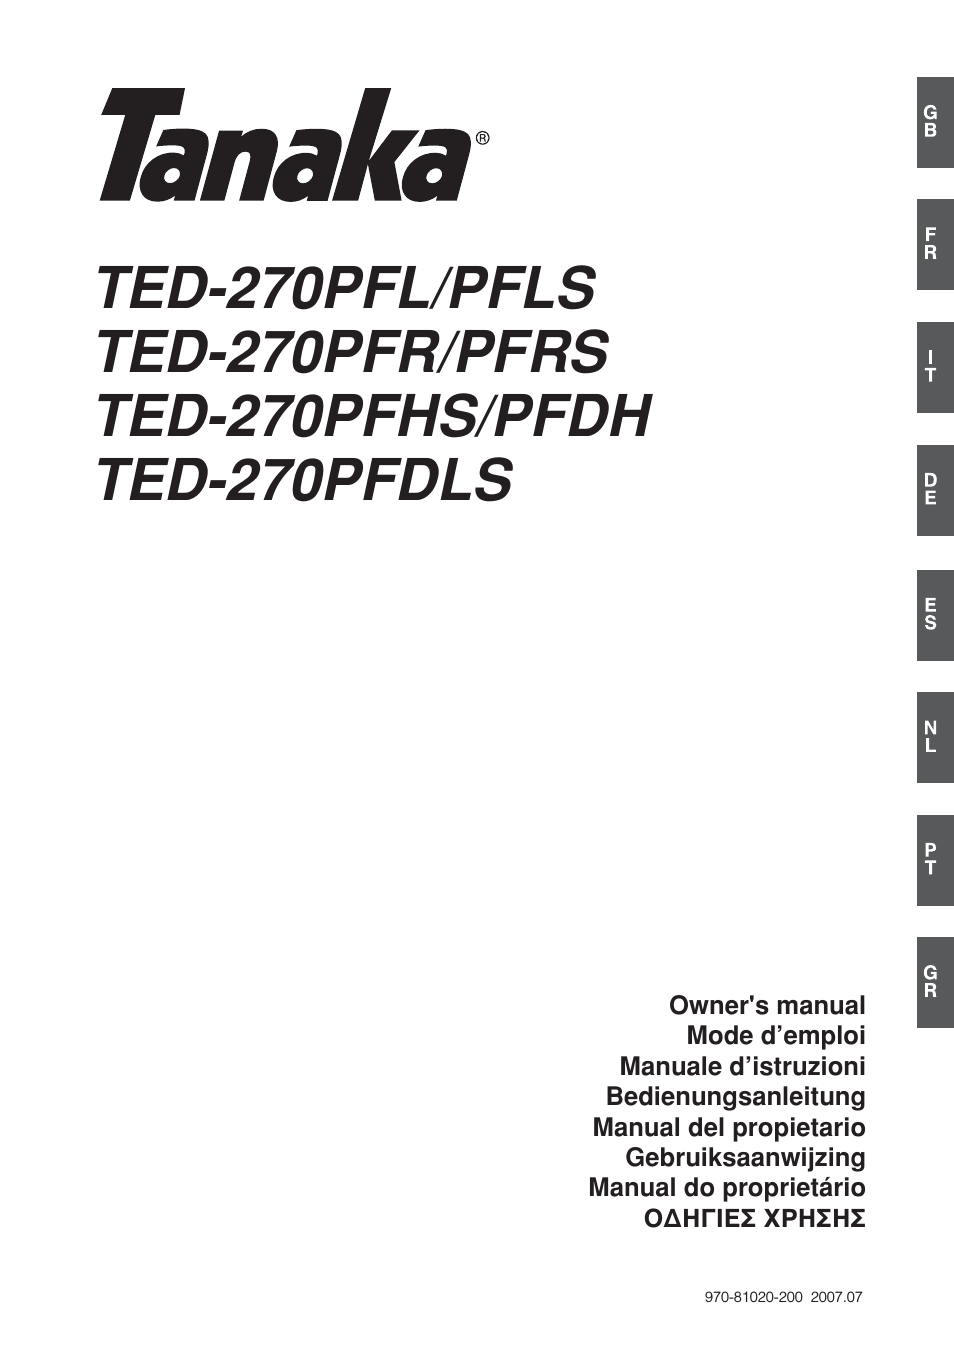 TED-270PFDH